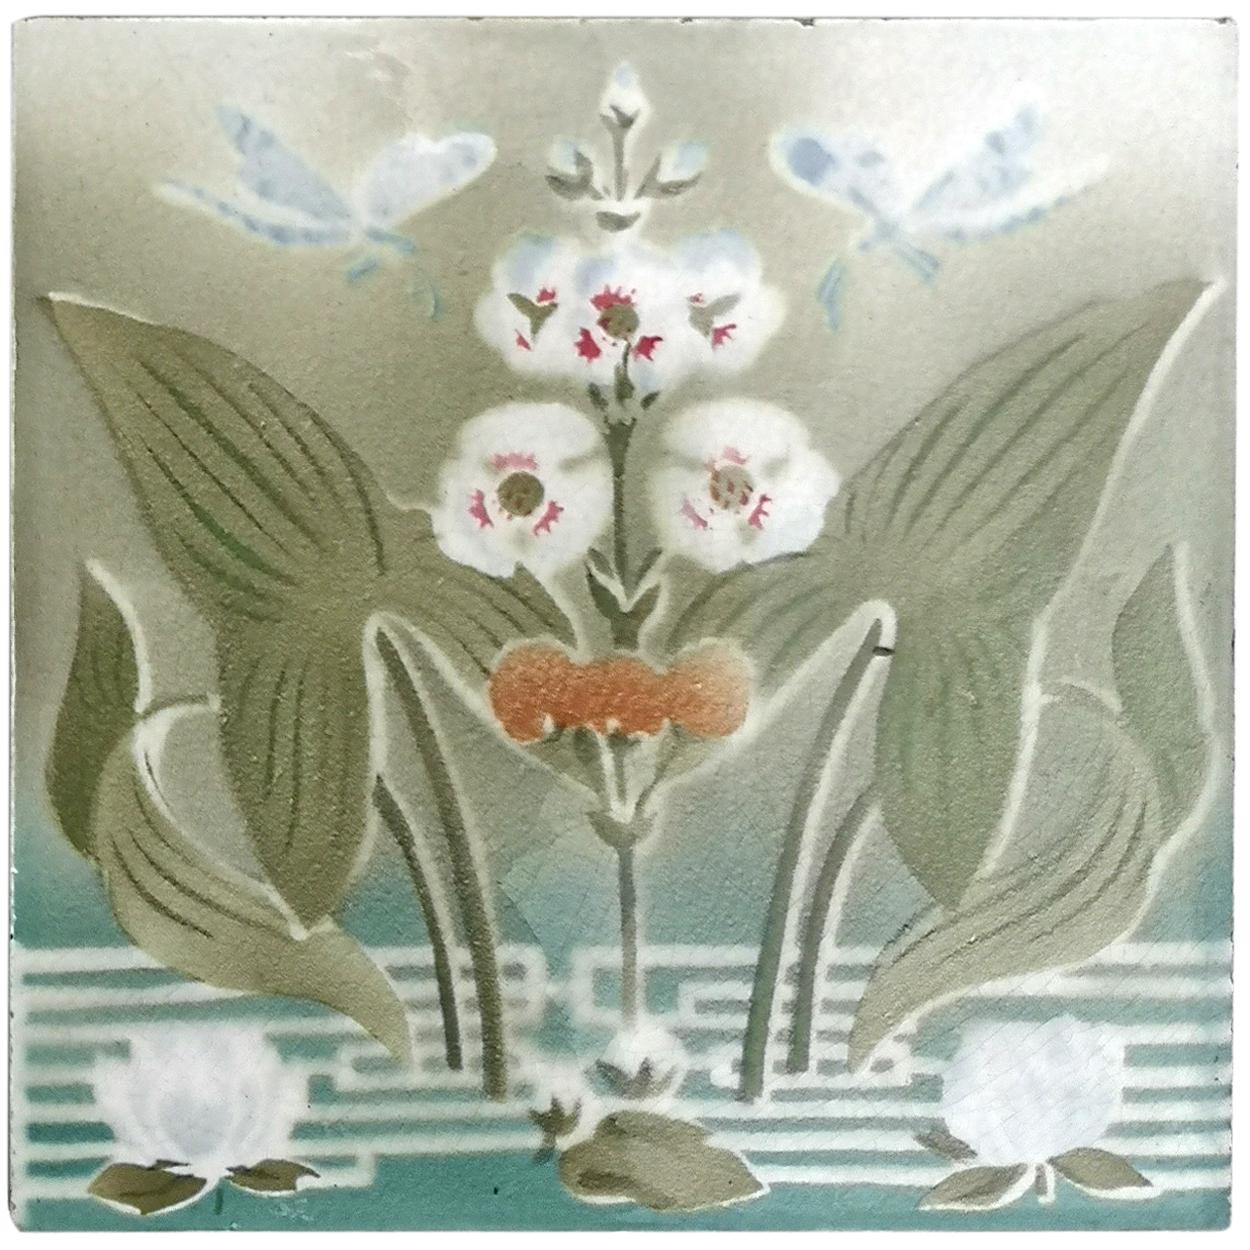 This is an amazing set of antique Jugendstil handmade tiles.
A beautiful scenery of water lilies, arrow weed and dragonflies. In soft green, soft blue, turquoise and white. These tiles would be charming displayed on easels, framed or incorporated